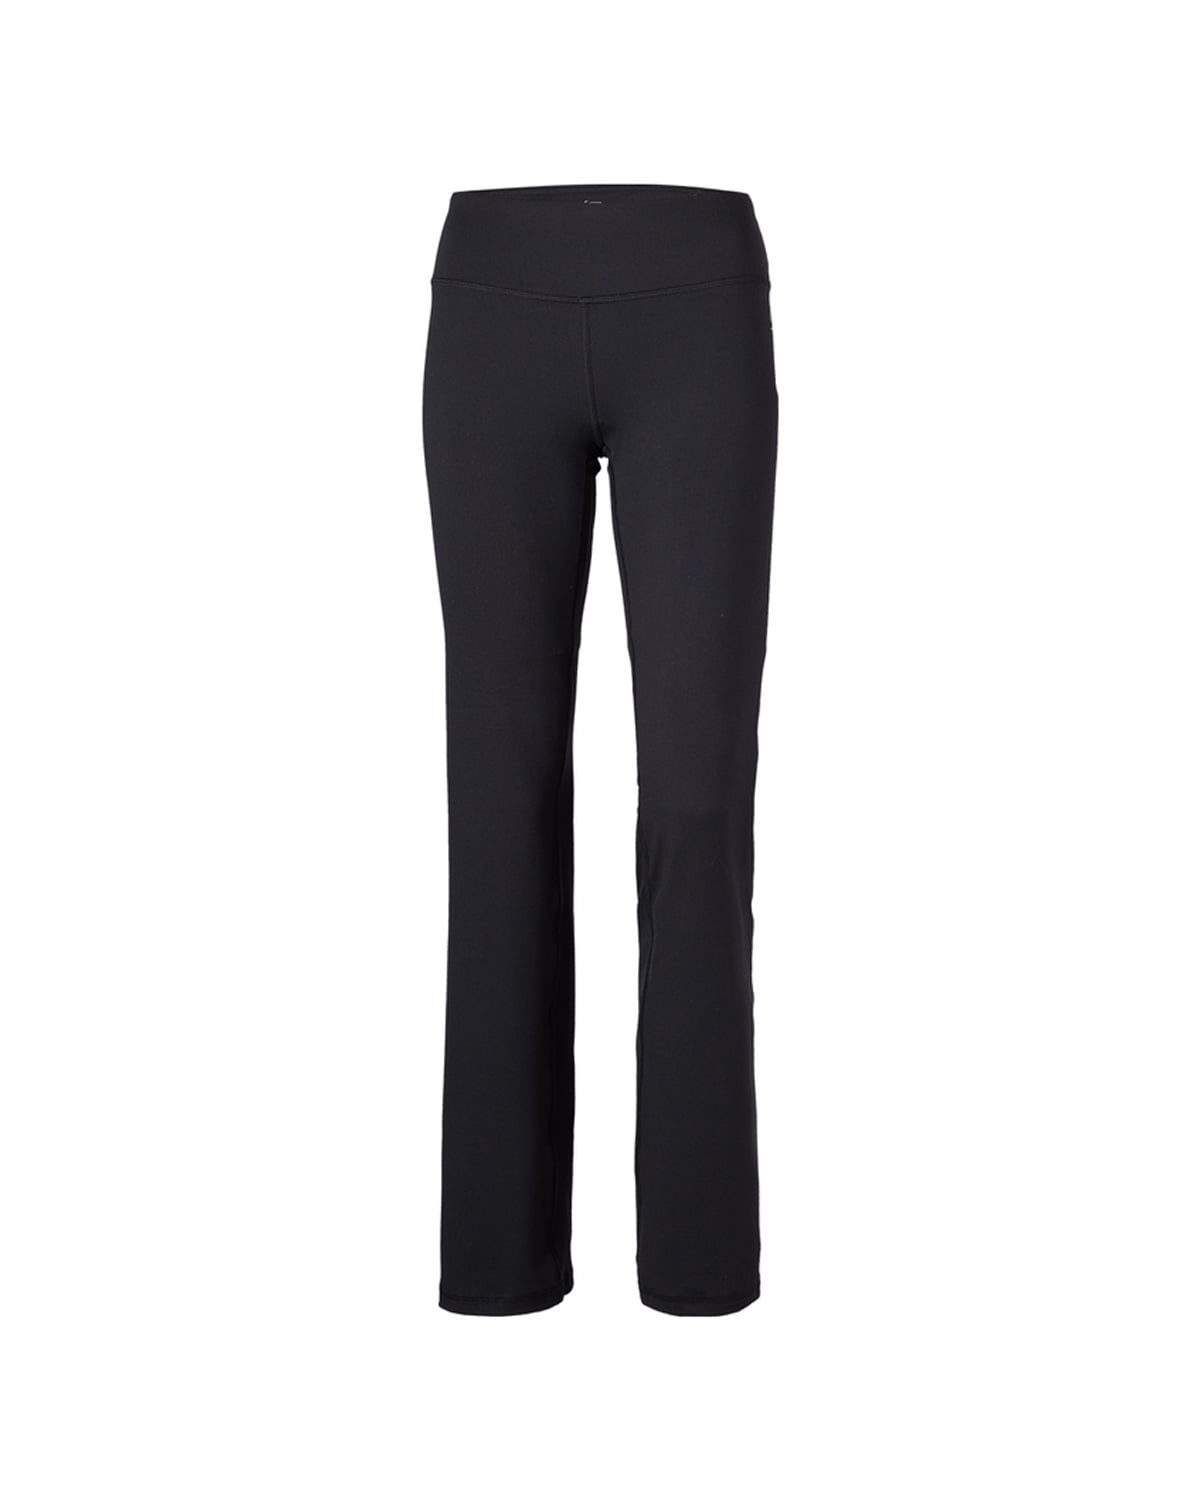 Fitness Wear Womens Cotton Spandex Boot Pant in Black Small